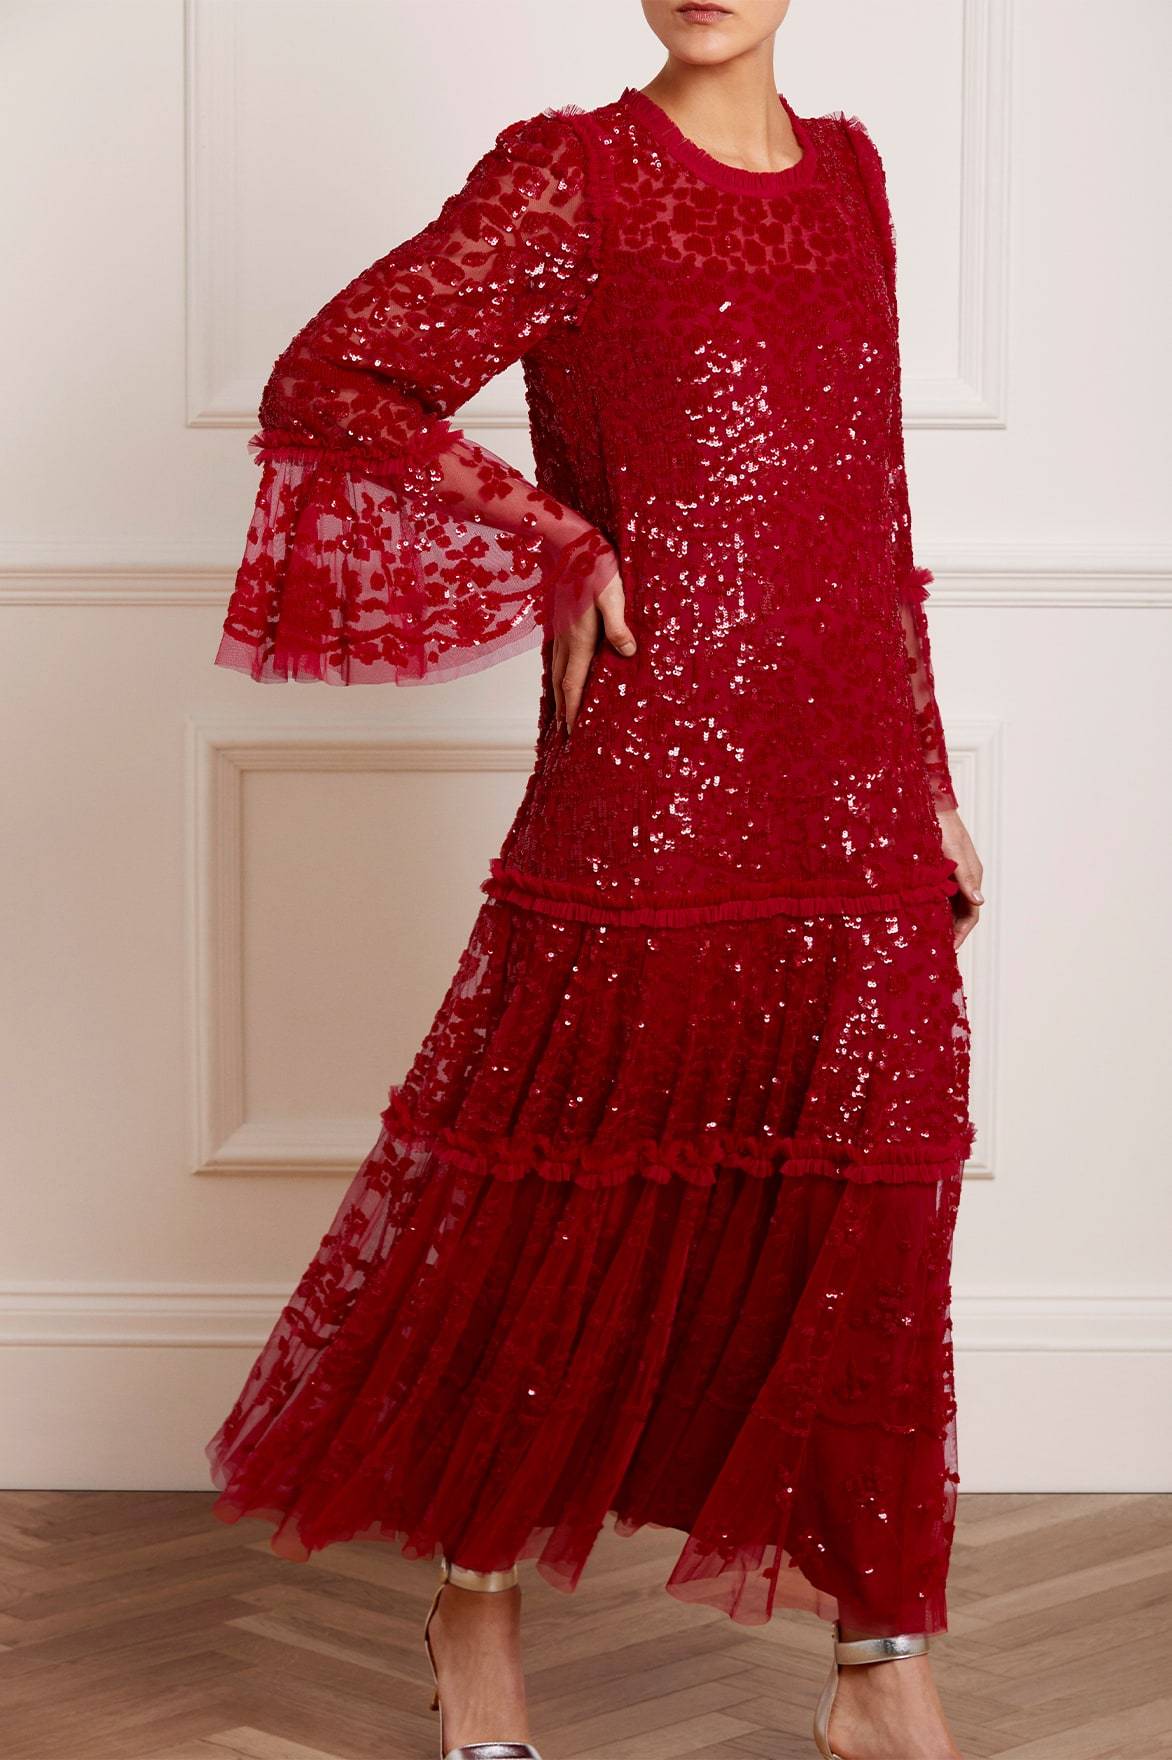 Downton Abbey Inspired Dresses Needle  Thread Annie Sequin Tiered Ankle Gown Red US 16 $1,029.00 AT vintagedancer.com